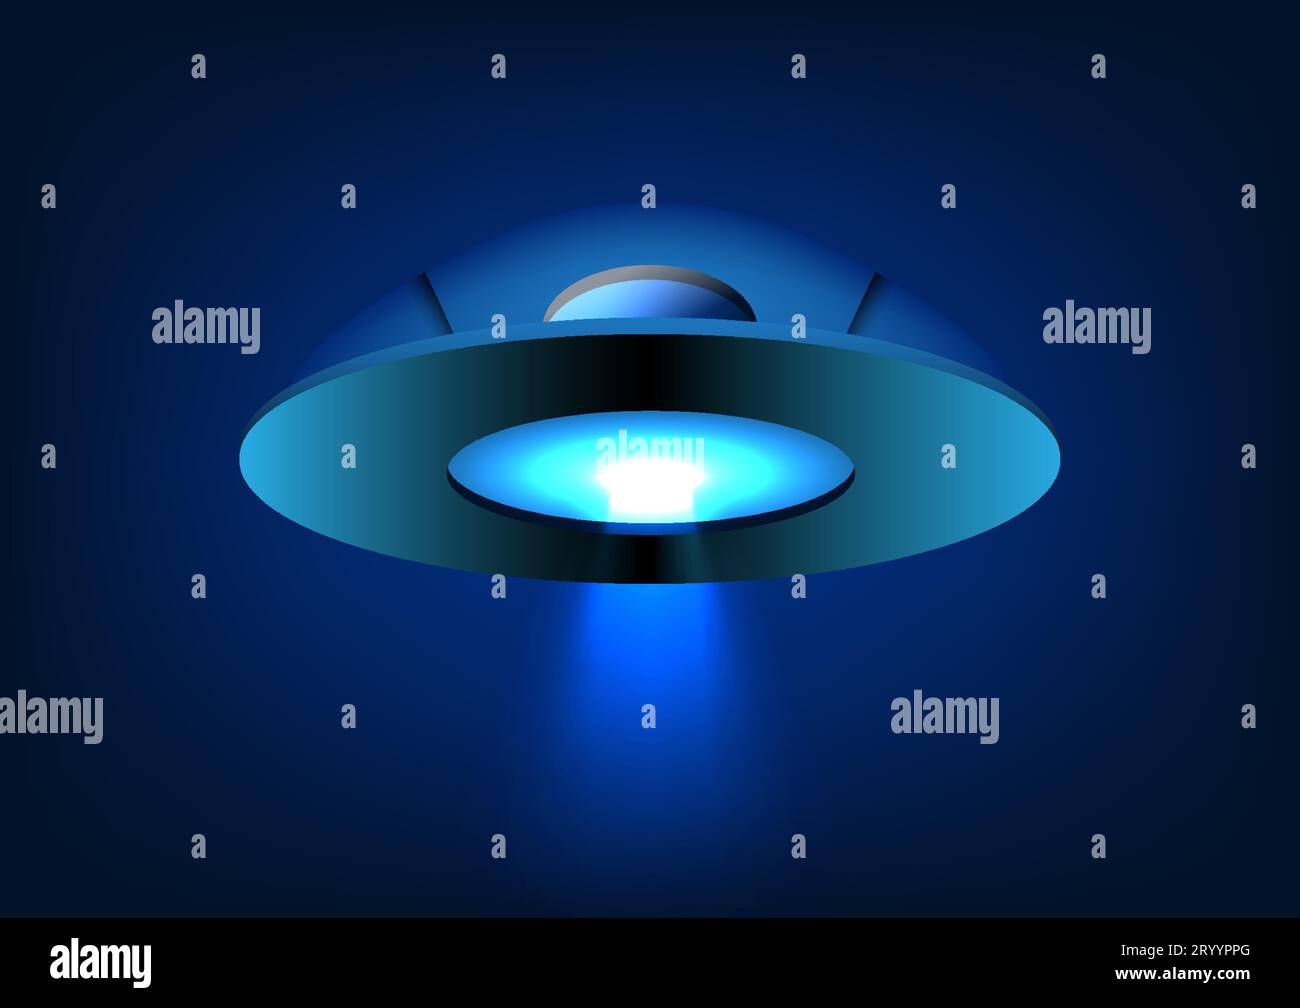 UFO spaceship A beam of white light came out from the spacecraft. is a vector image Suitable for use as a decorative poster or as an illustration Stock Vector